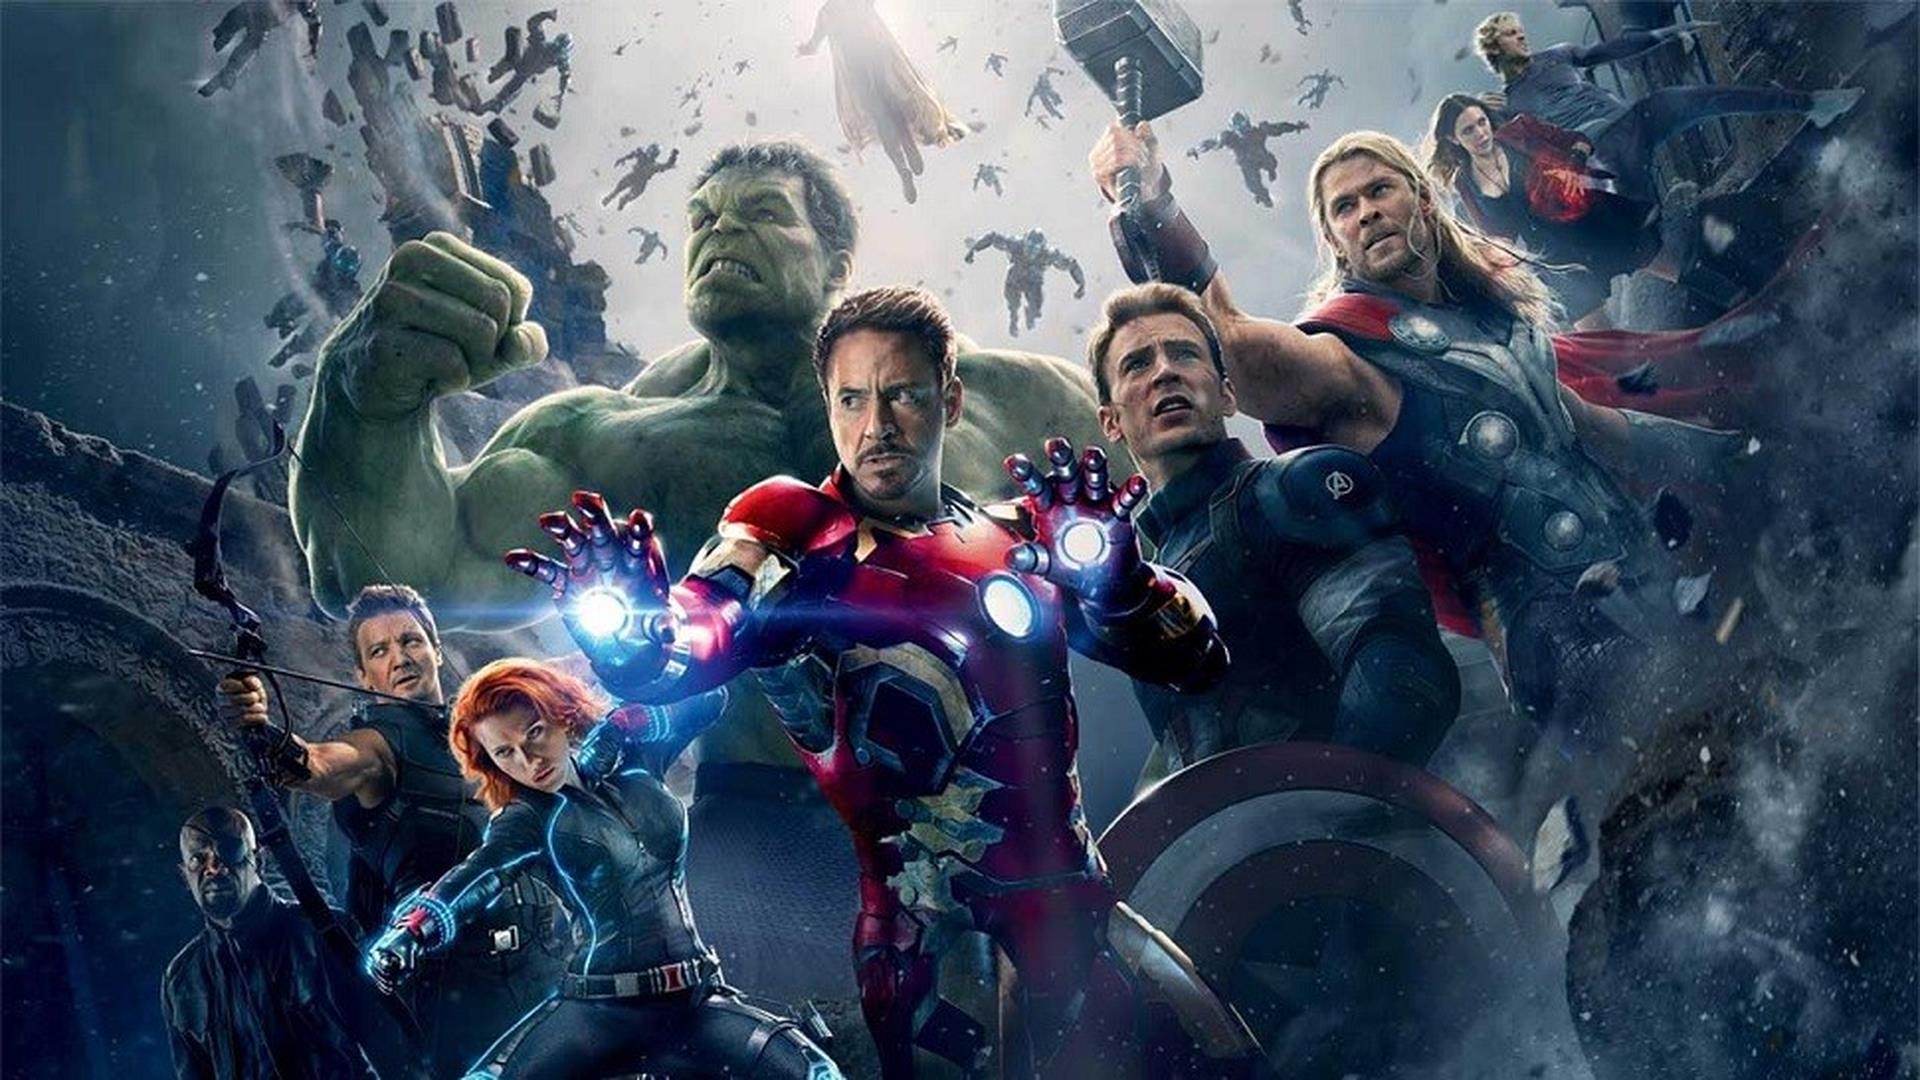 Avengers-Age-of-Ultron-2015-Movie-Poster